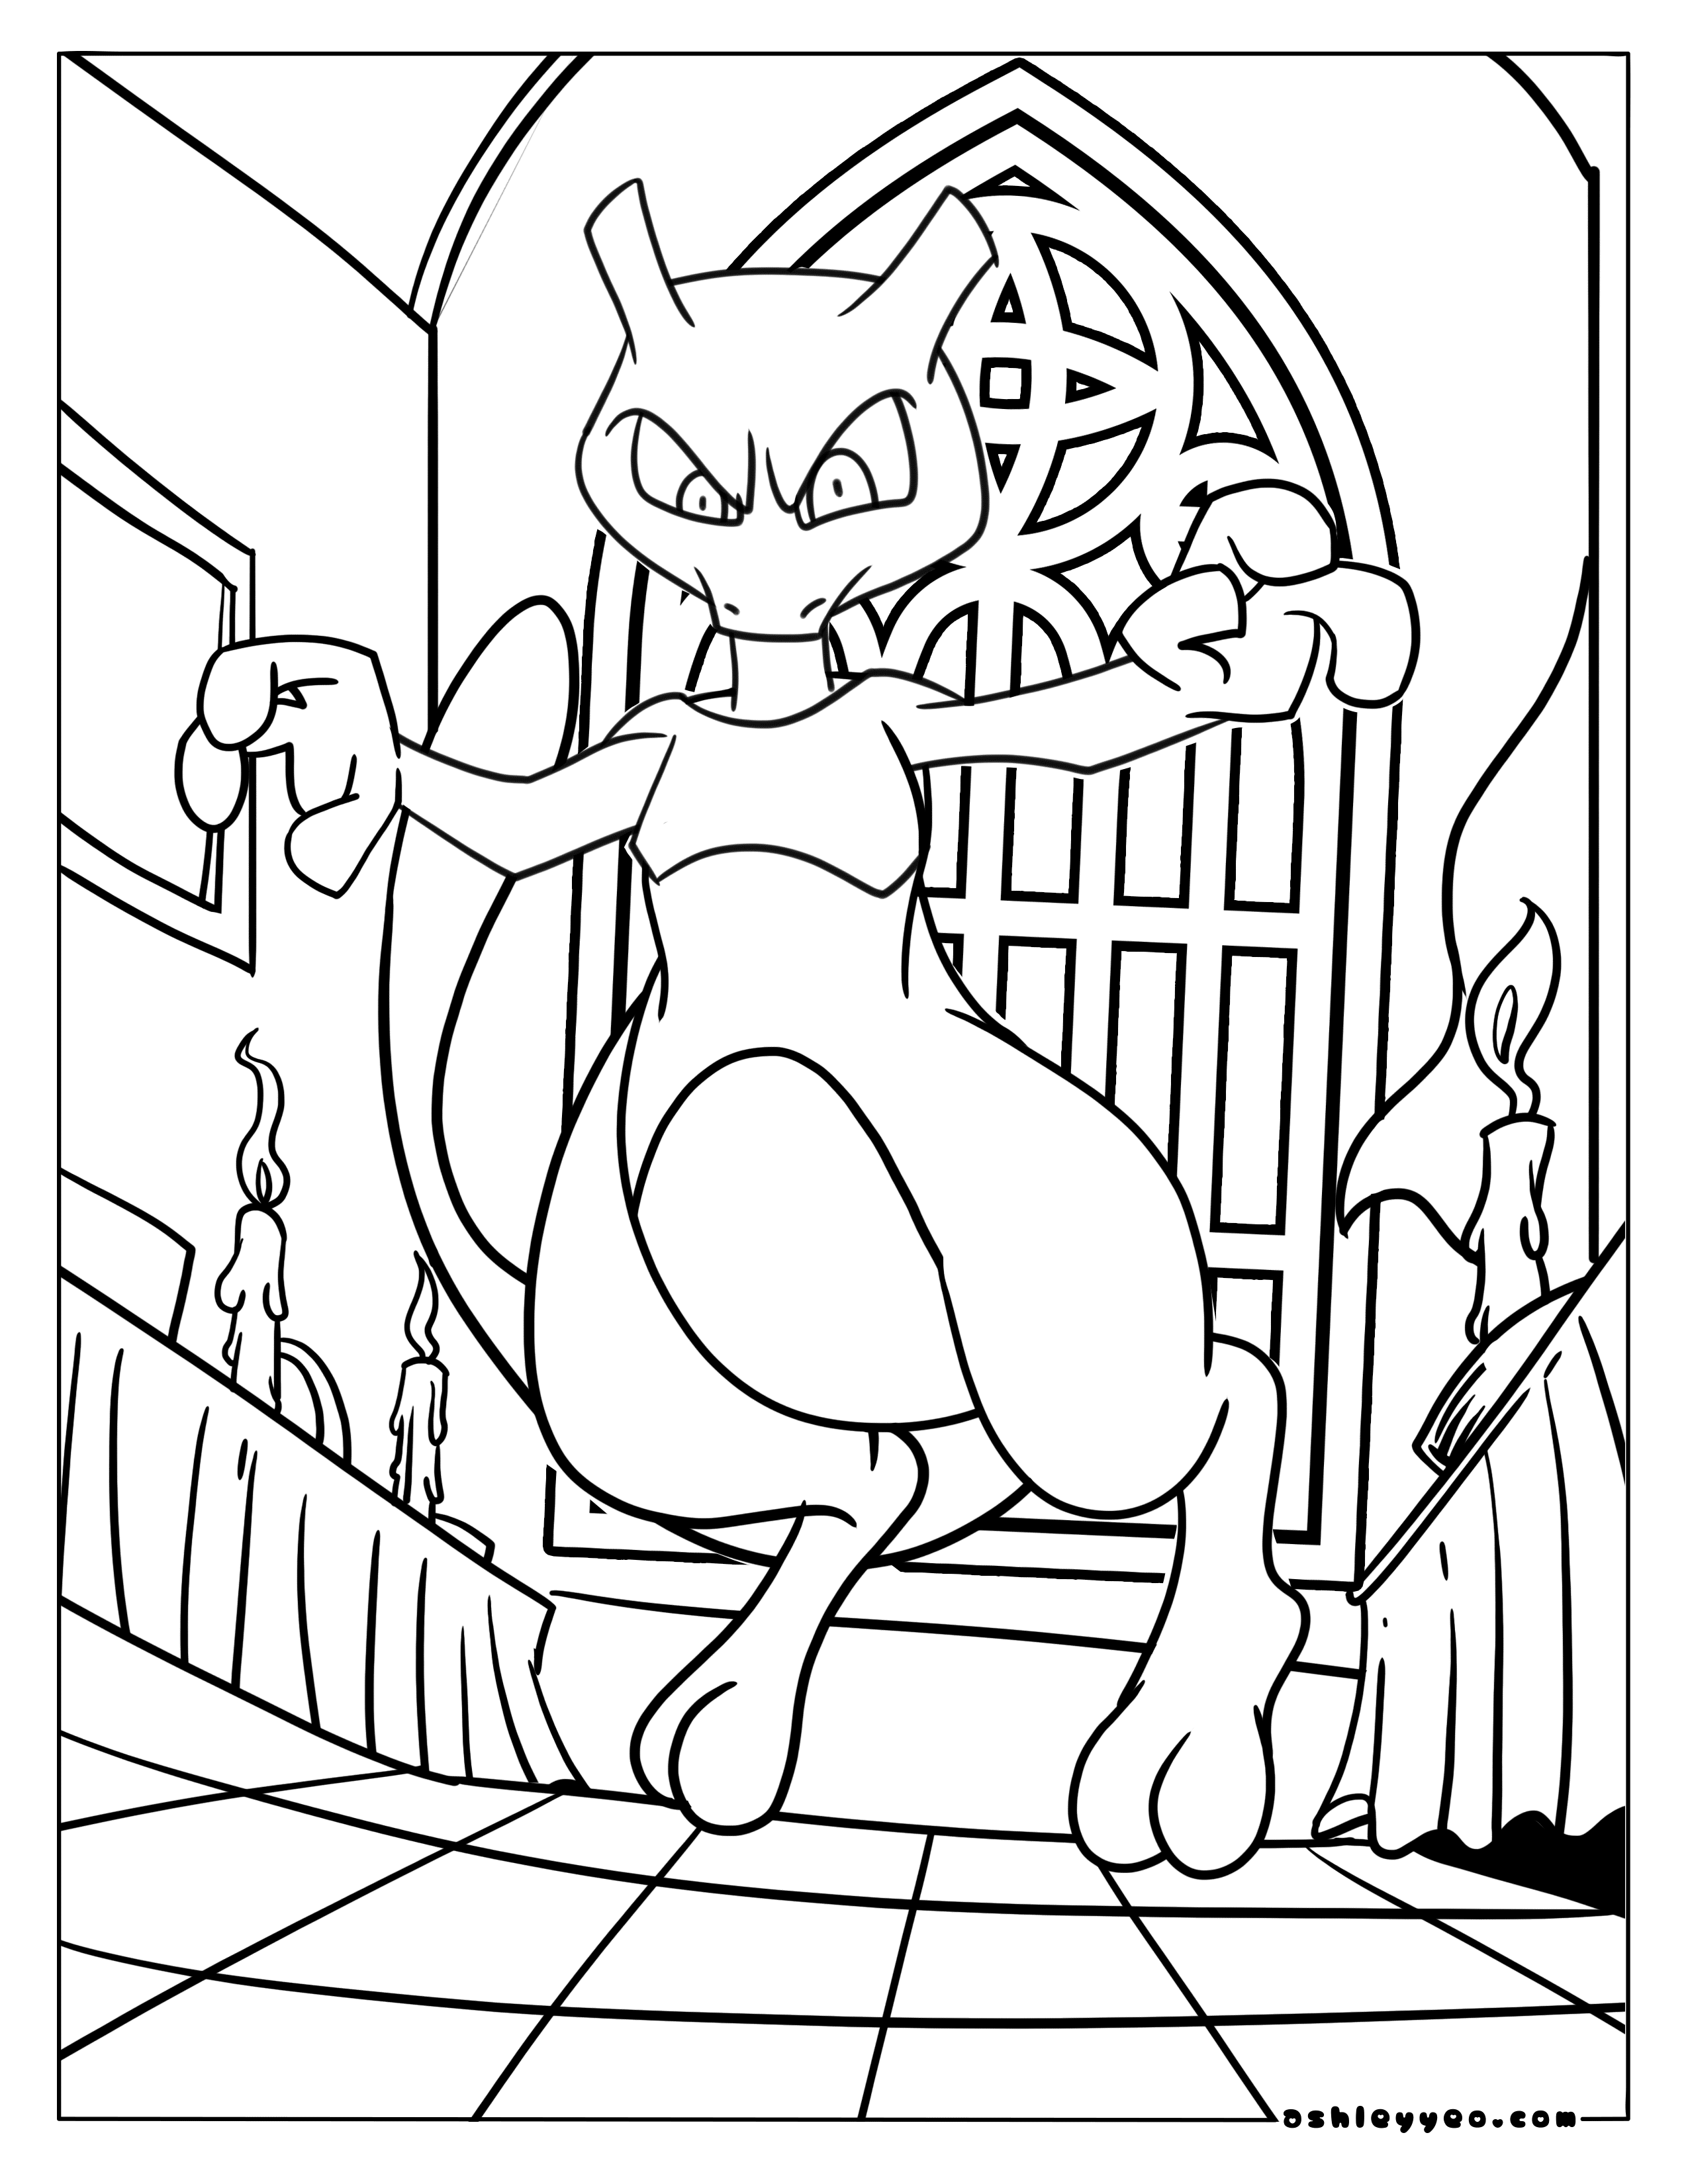 Mew Pokemon Coloring Pages 2019, Educative Printable